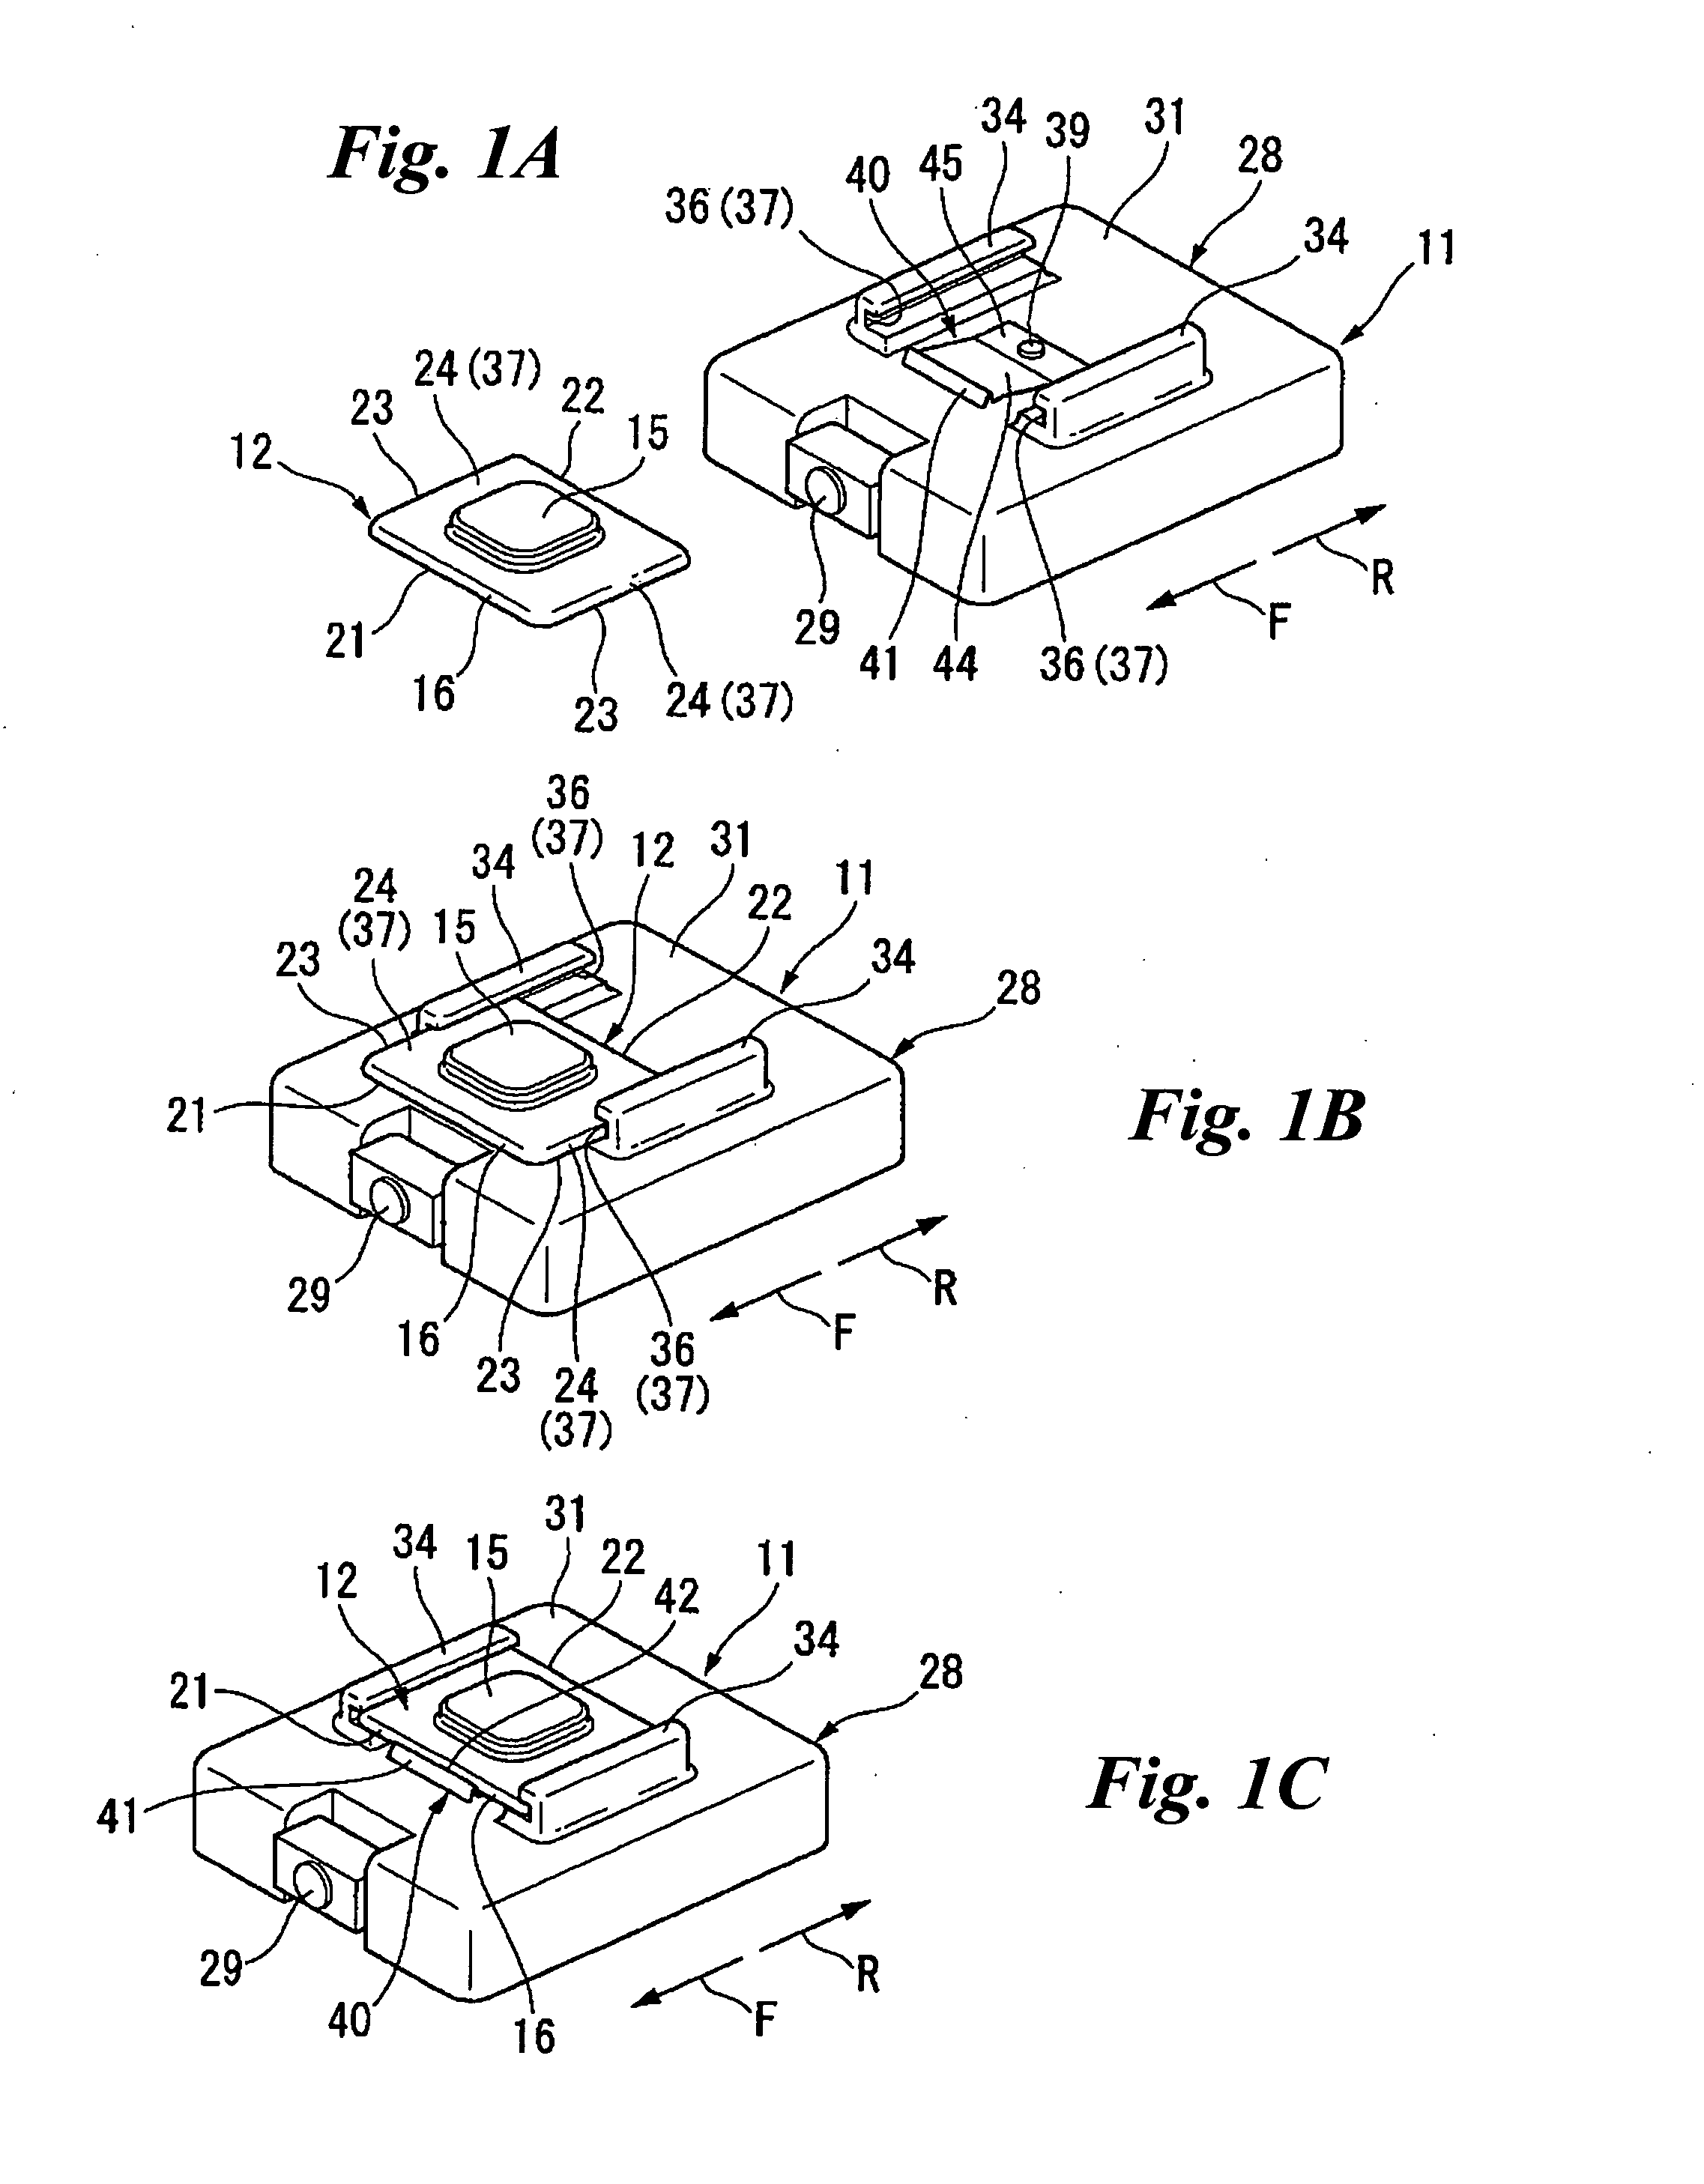 Structure for mounting camera on vehicle